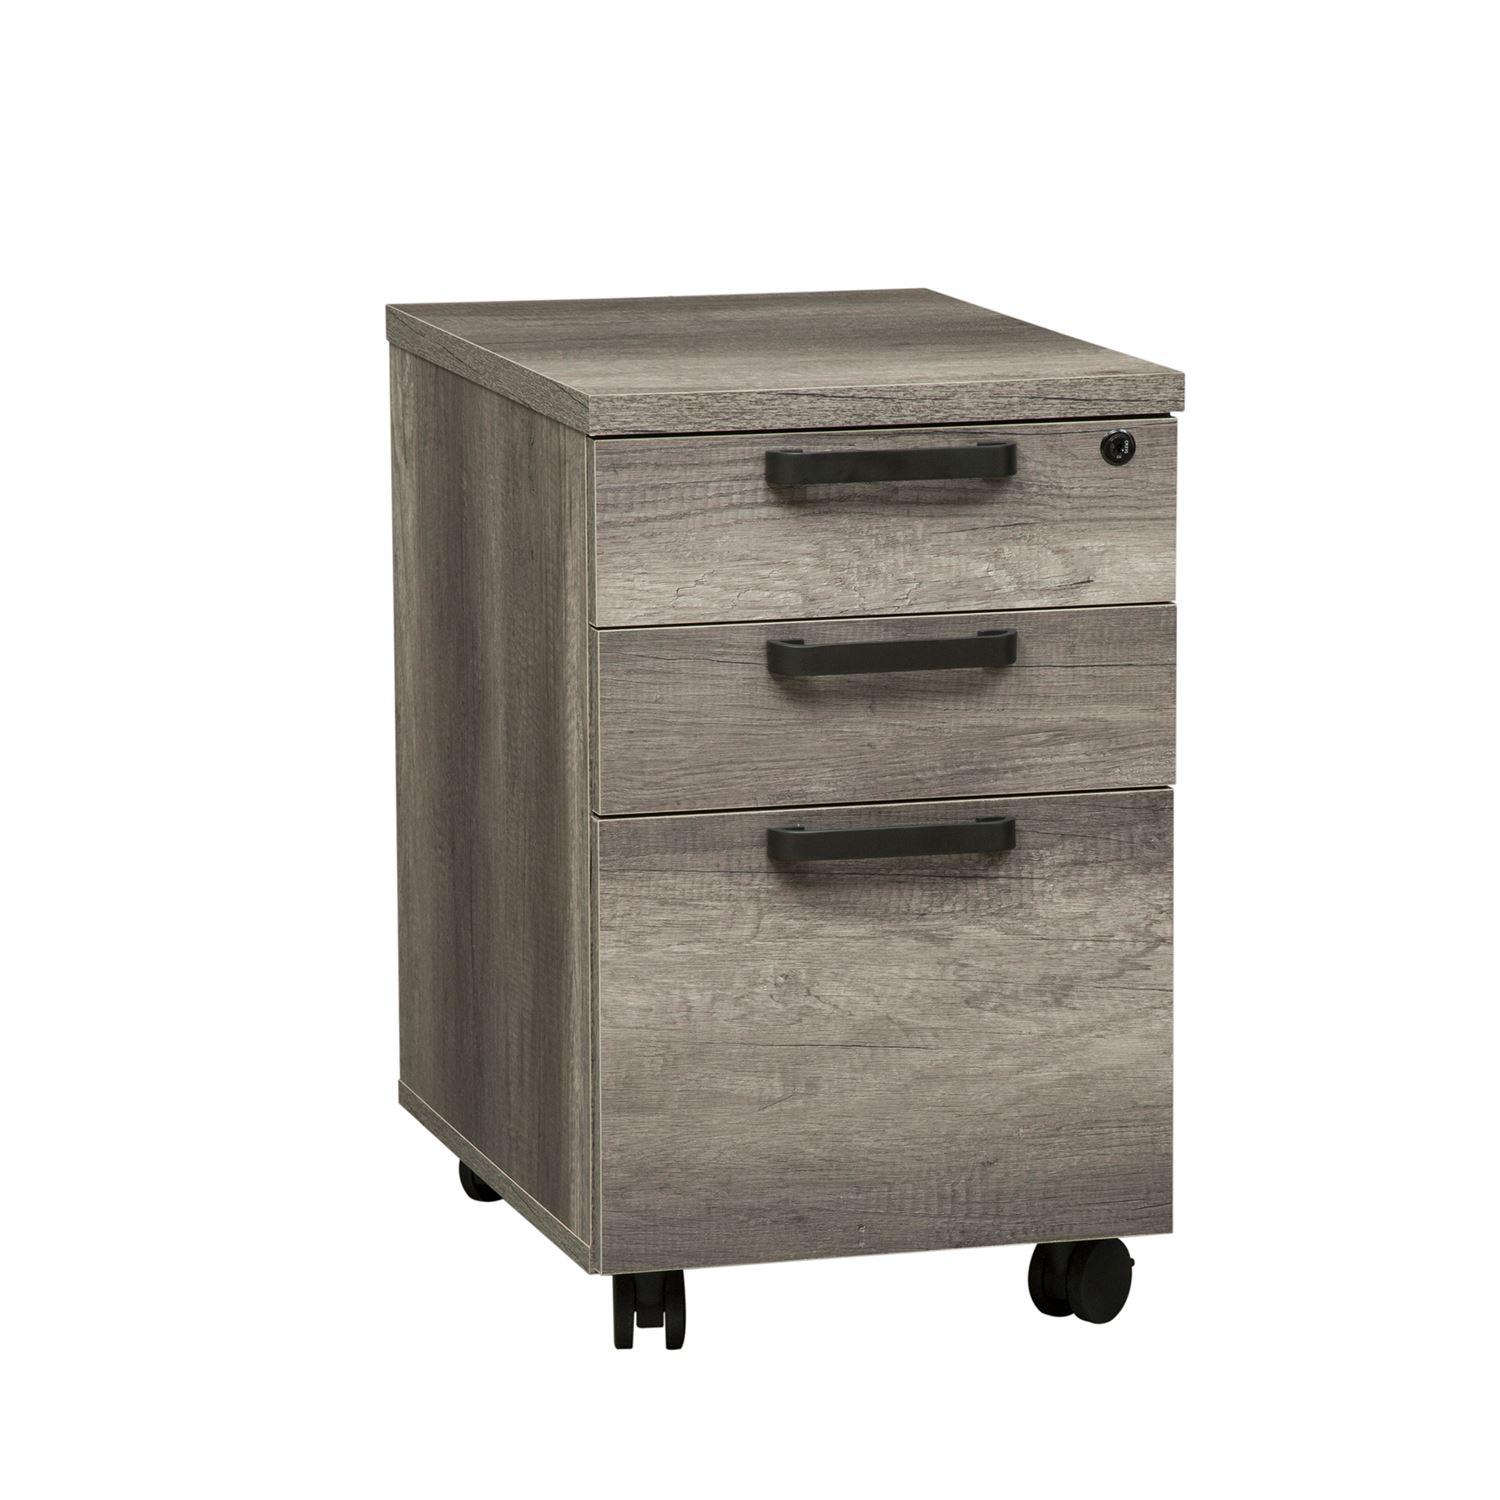 Contemporary Filling Cabinet Tanners Creek  (686-HO) Filling Cabinet 686-HO146 in Gray 